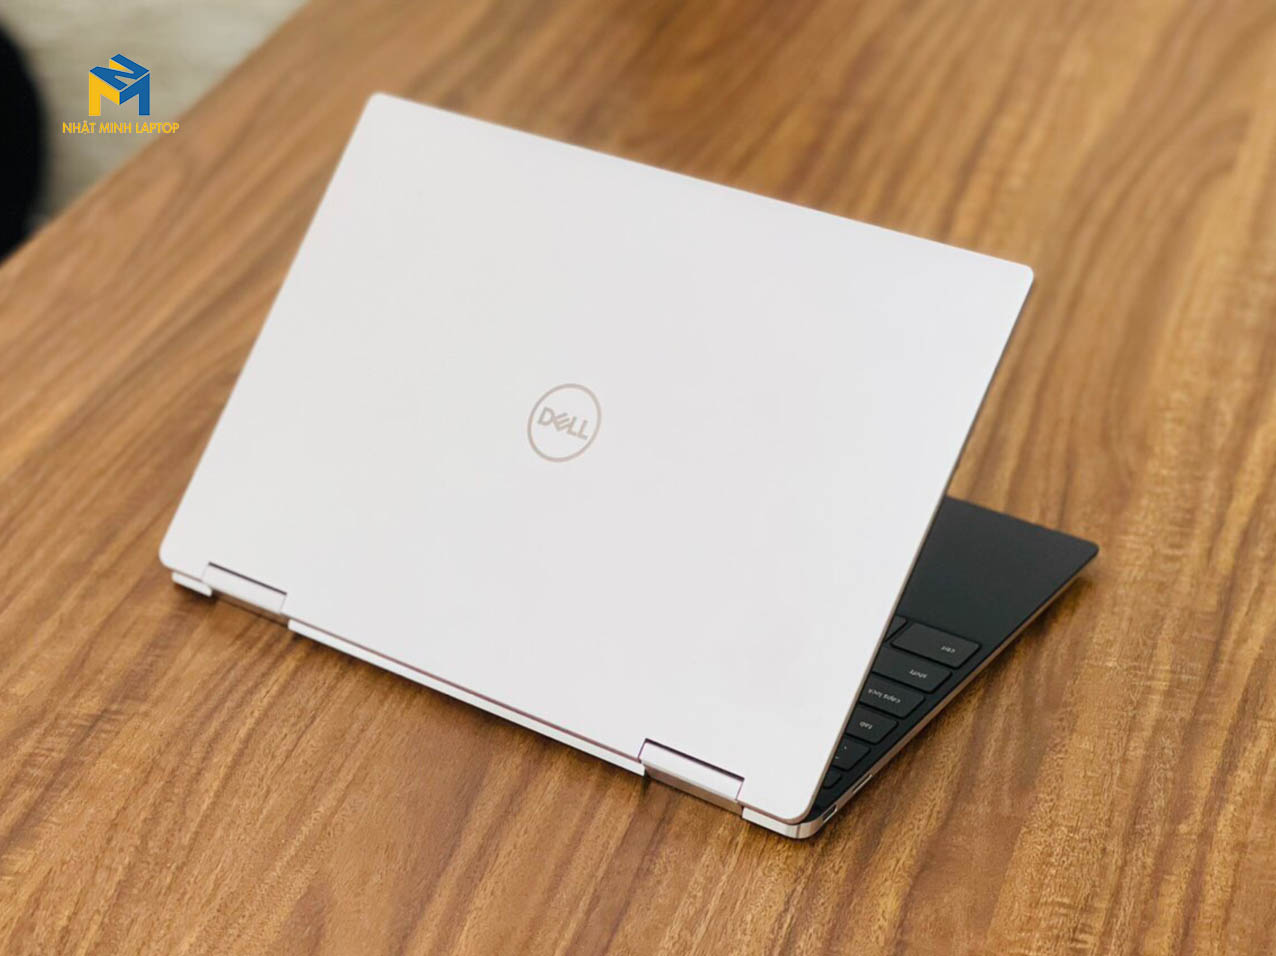 Dell XPS 13 7390 2-in-1 Core i7 - 1065G7 Ram 16GB SSD 512GB 13.4" FHD+ Touch Like new 99%